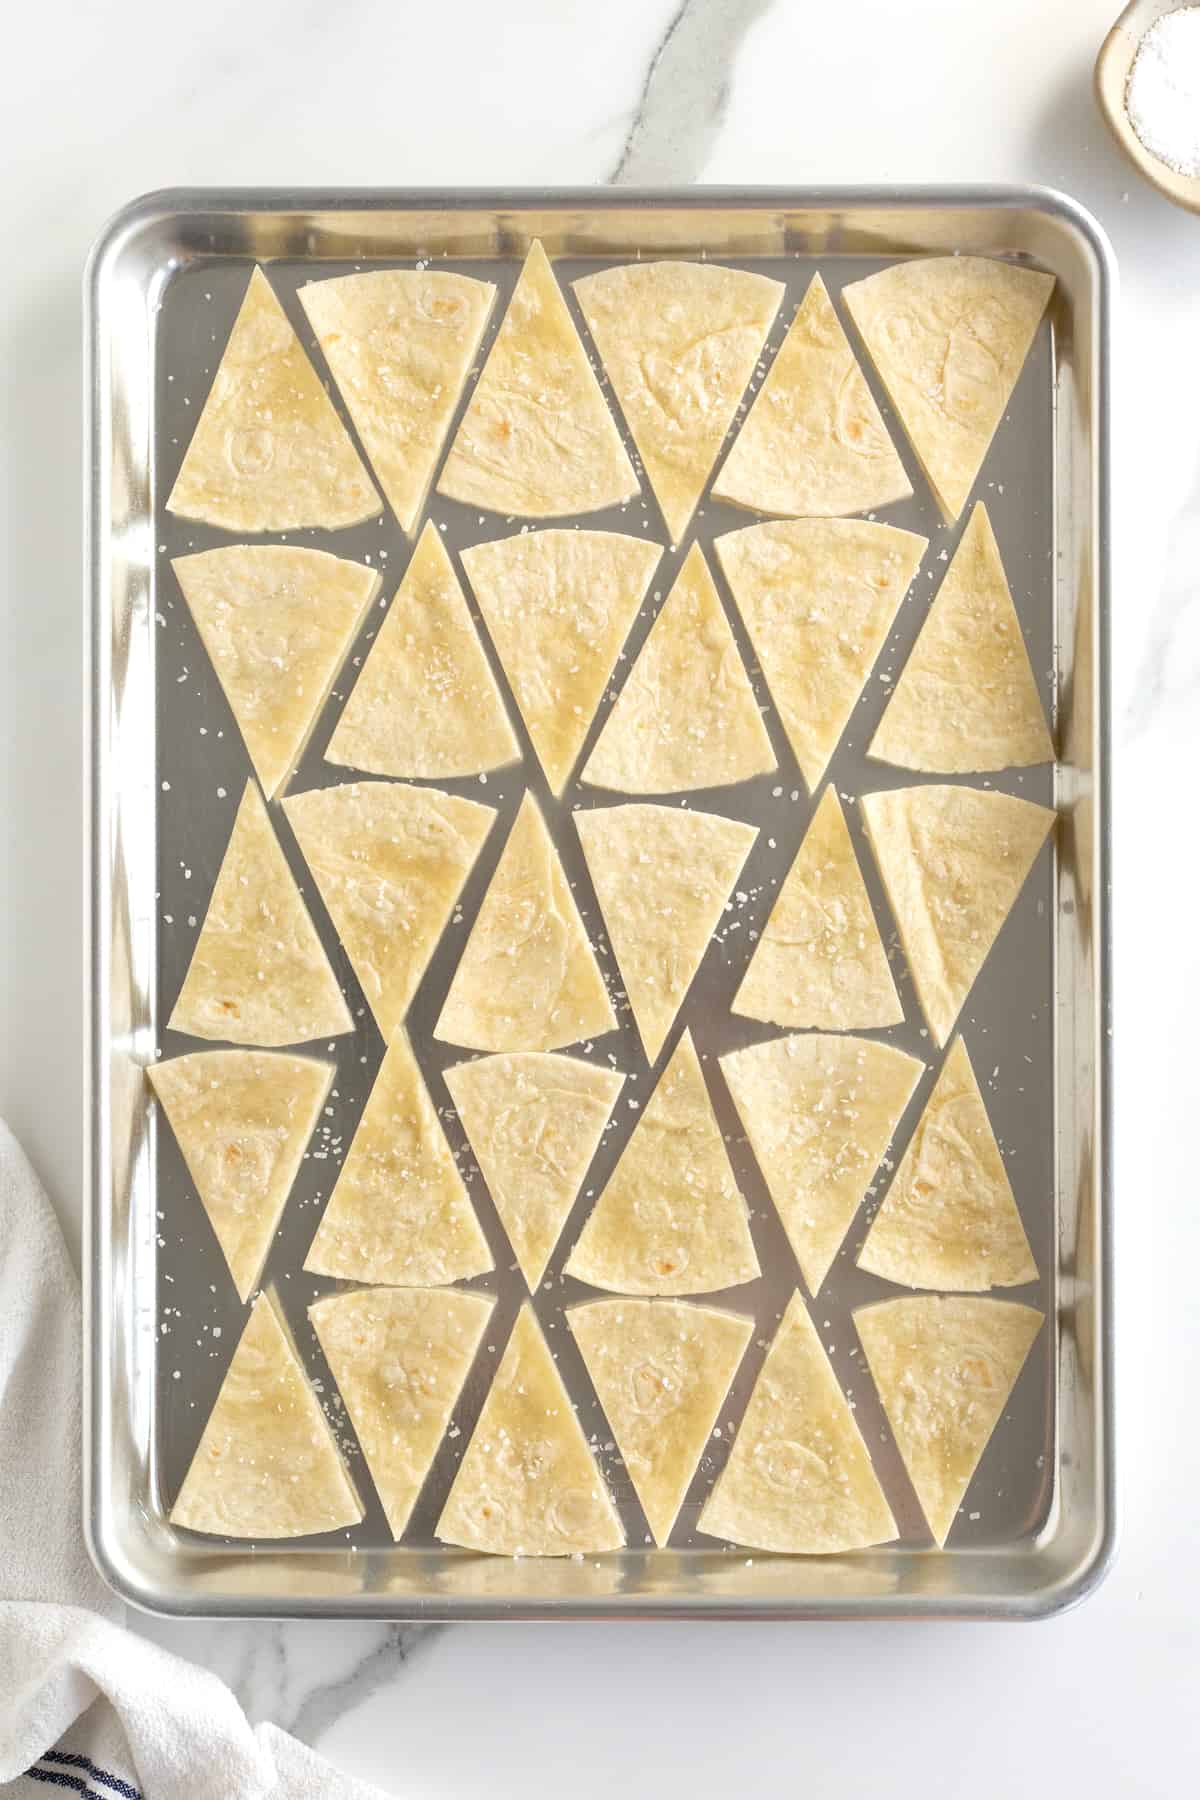 Triangle-cut tortillas on a baking sheet sprinkled with sea salt.